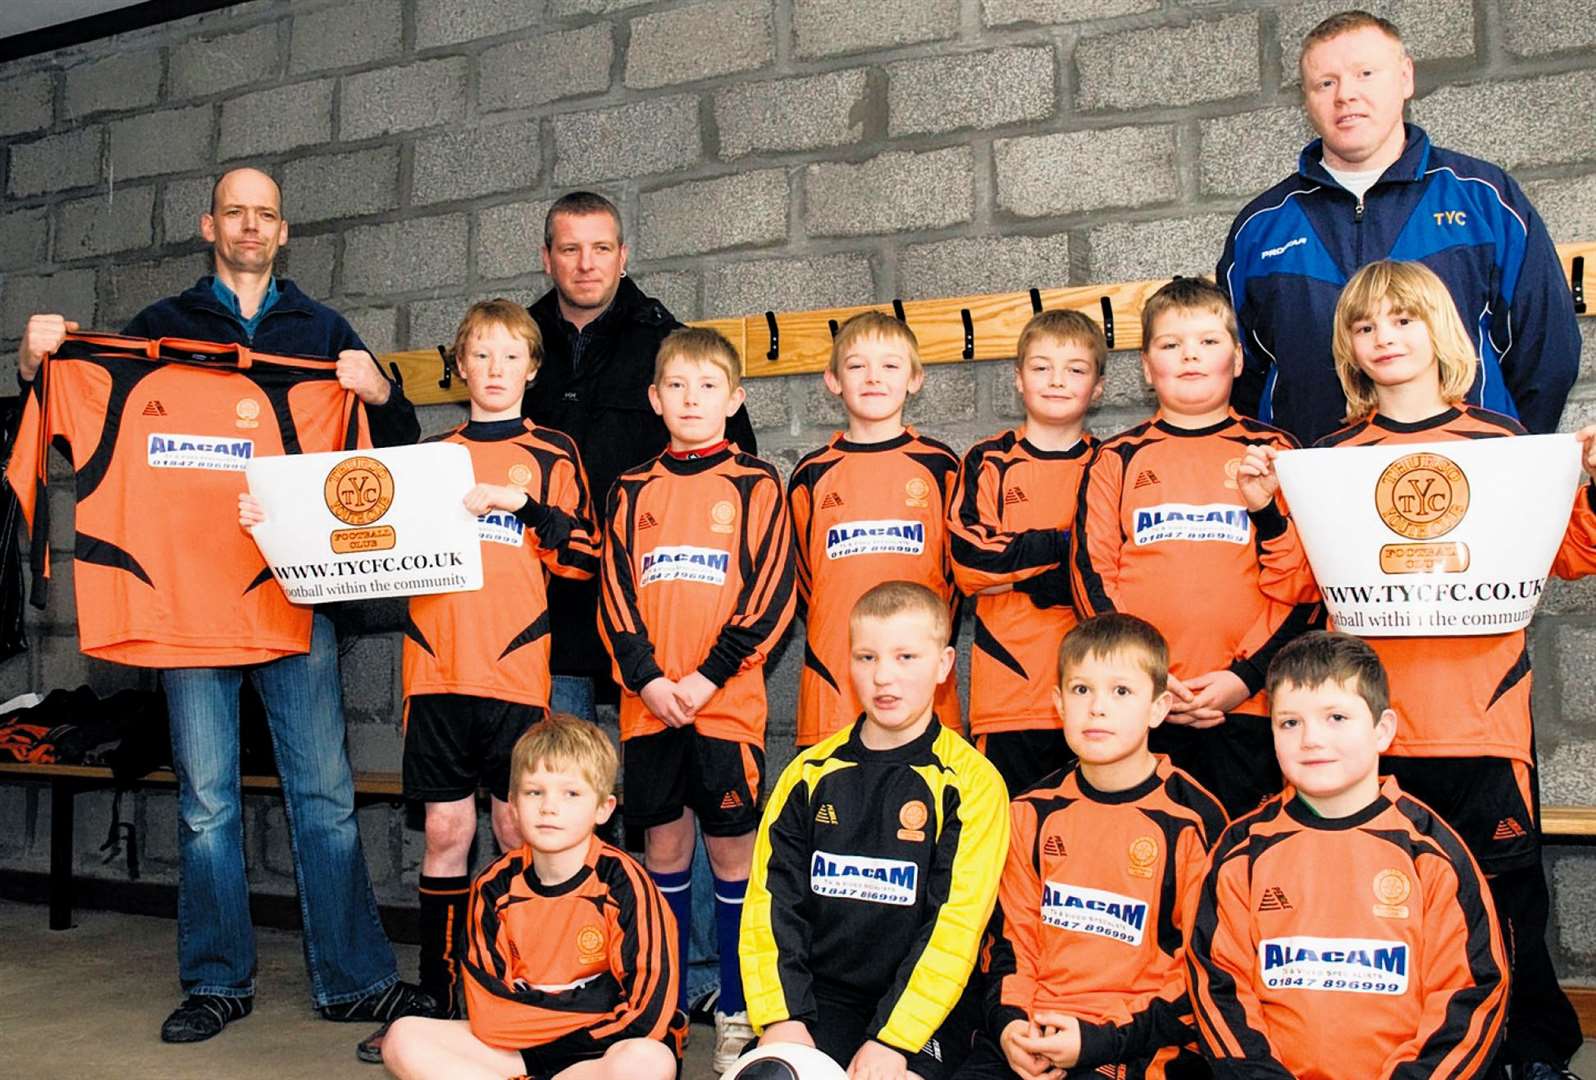 Thurso Youth Club U11s received new strips ahead of a trip to Blackpool’s annual football tournament in April 2009. Also in the picture are sponsor Alan Cameron and coaches Leslie Mackay and Paul Reid.